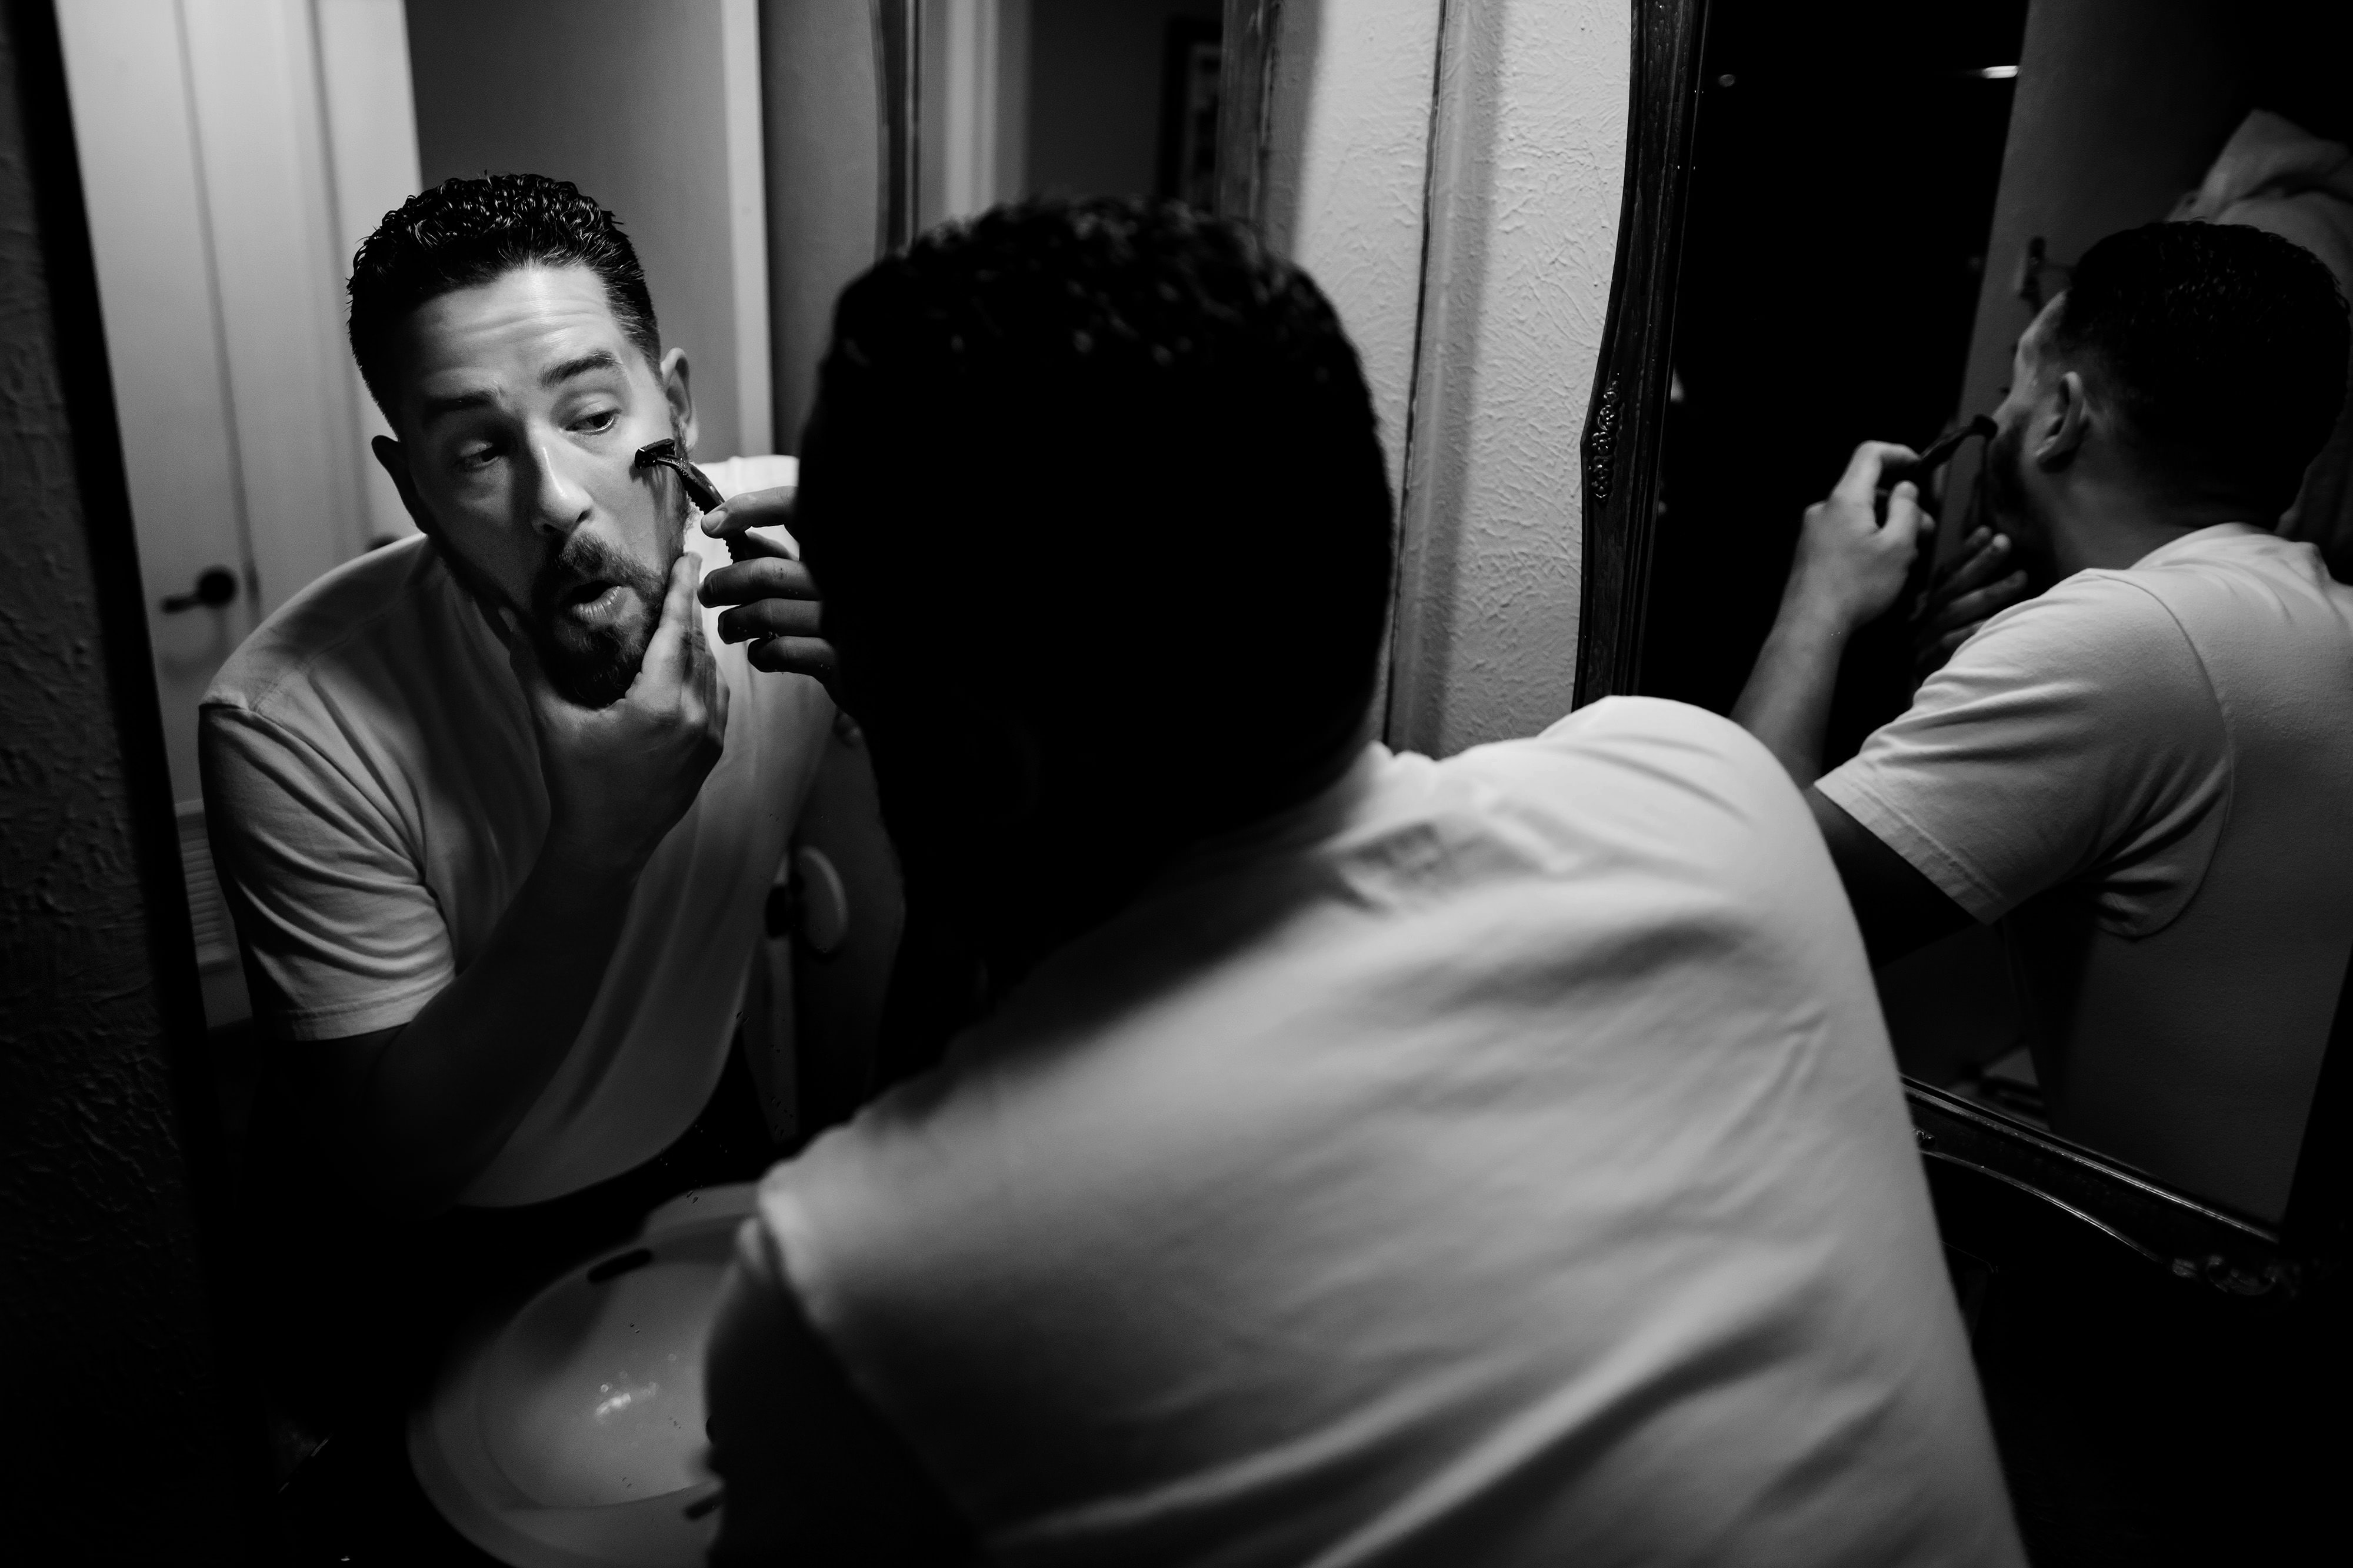 Nick shaves before his wedding